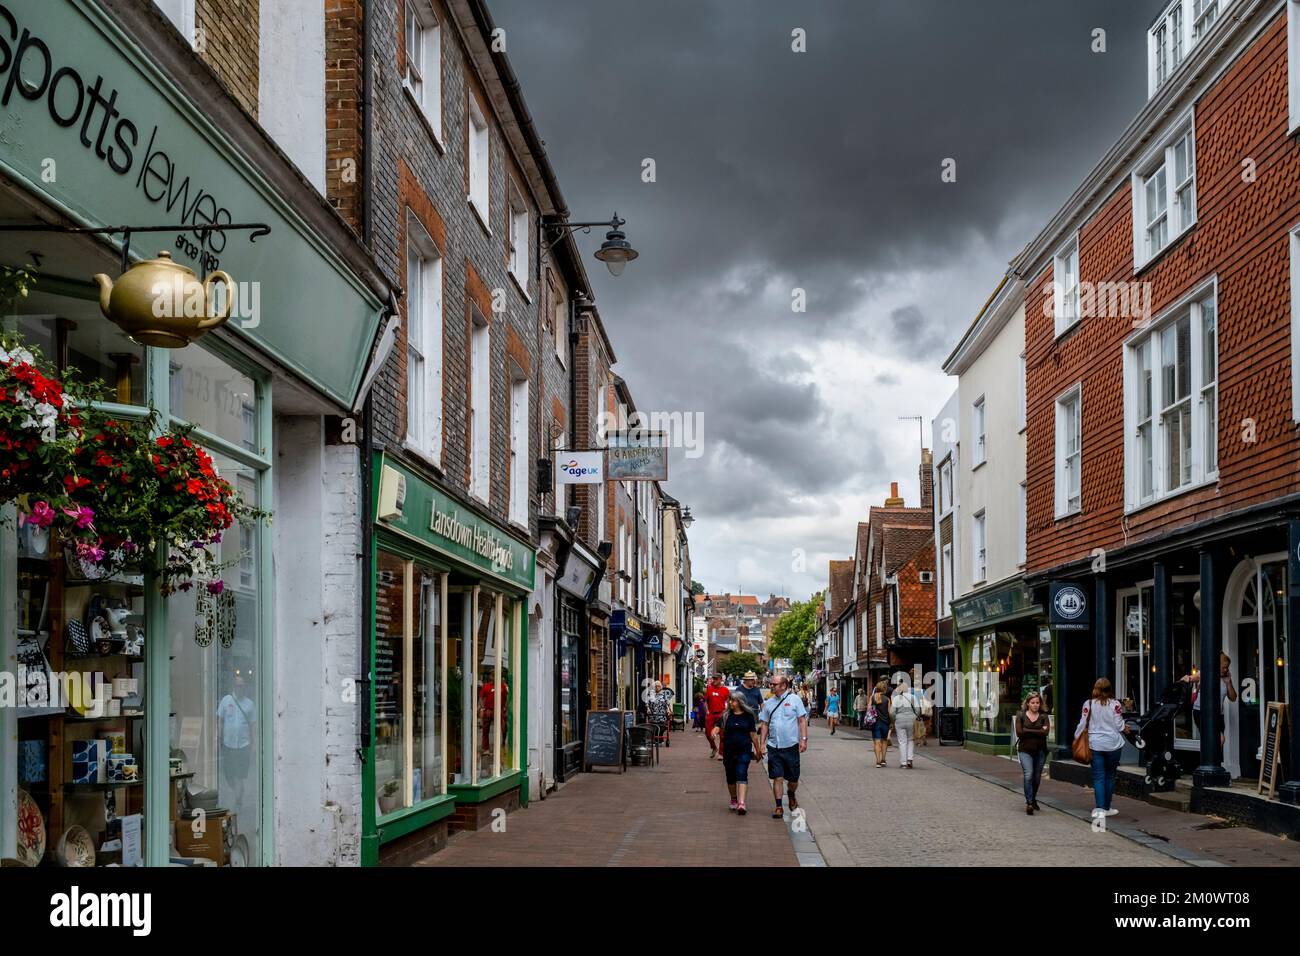 The High Street, Lewes, East Sussex, UK. Stock Photo